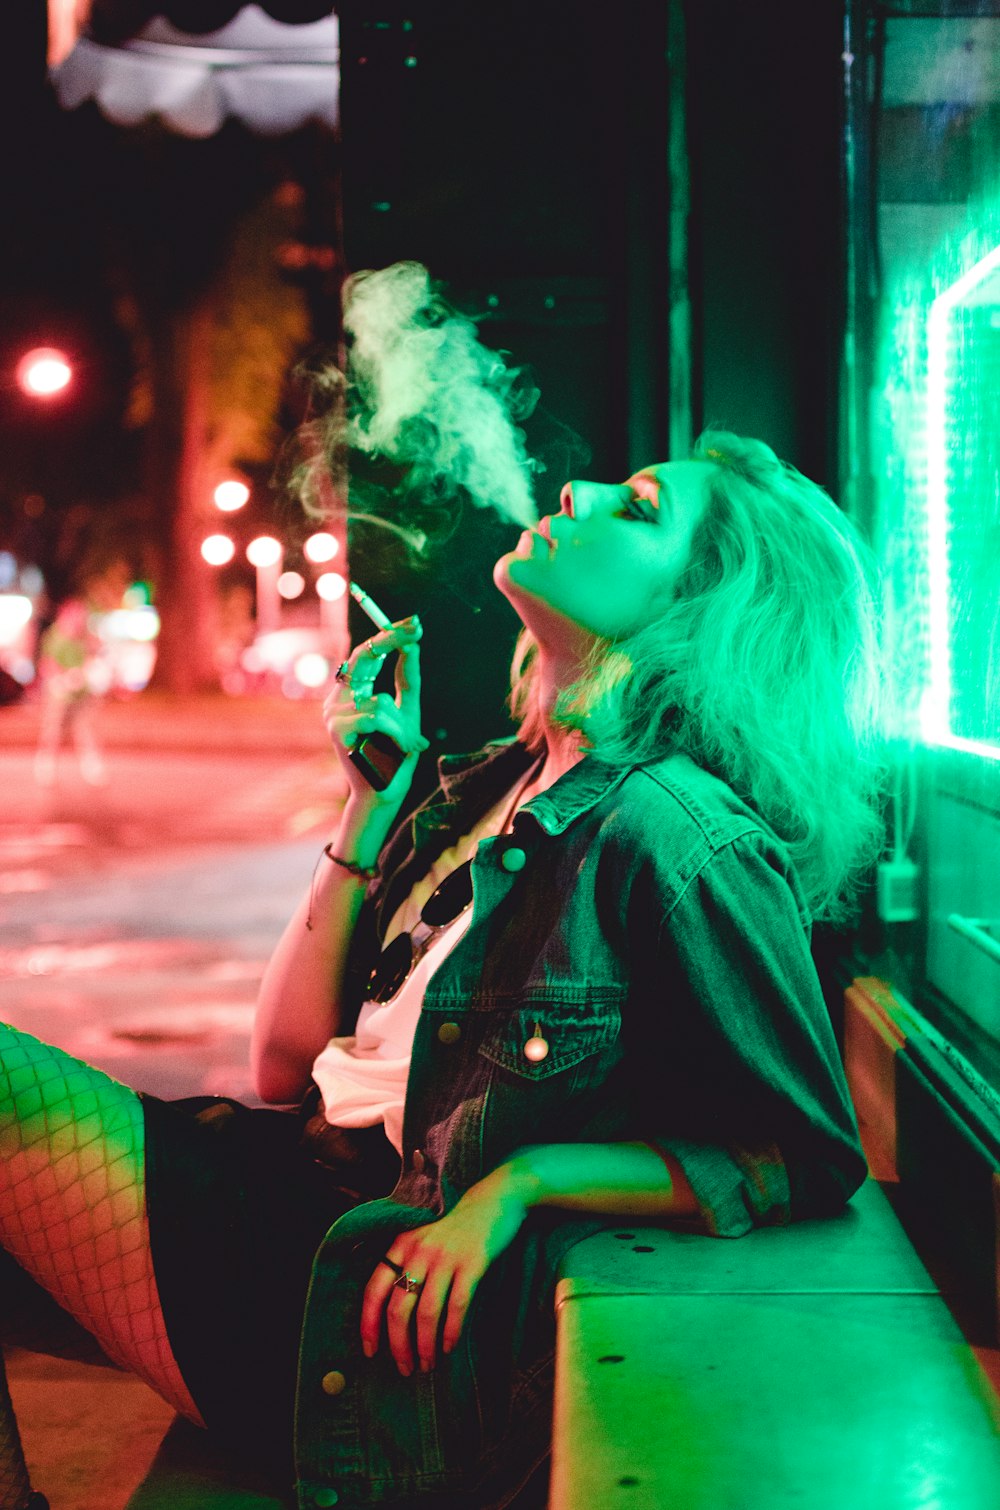 500+ Girl Smoking Pictures [HQ] | Download Free Images on Unsplash